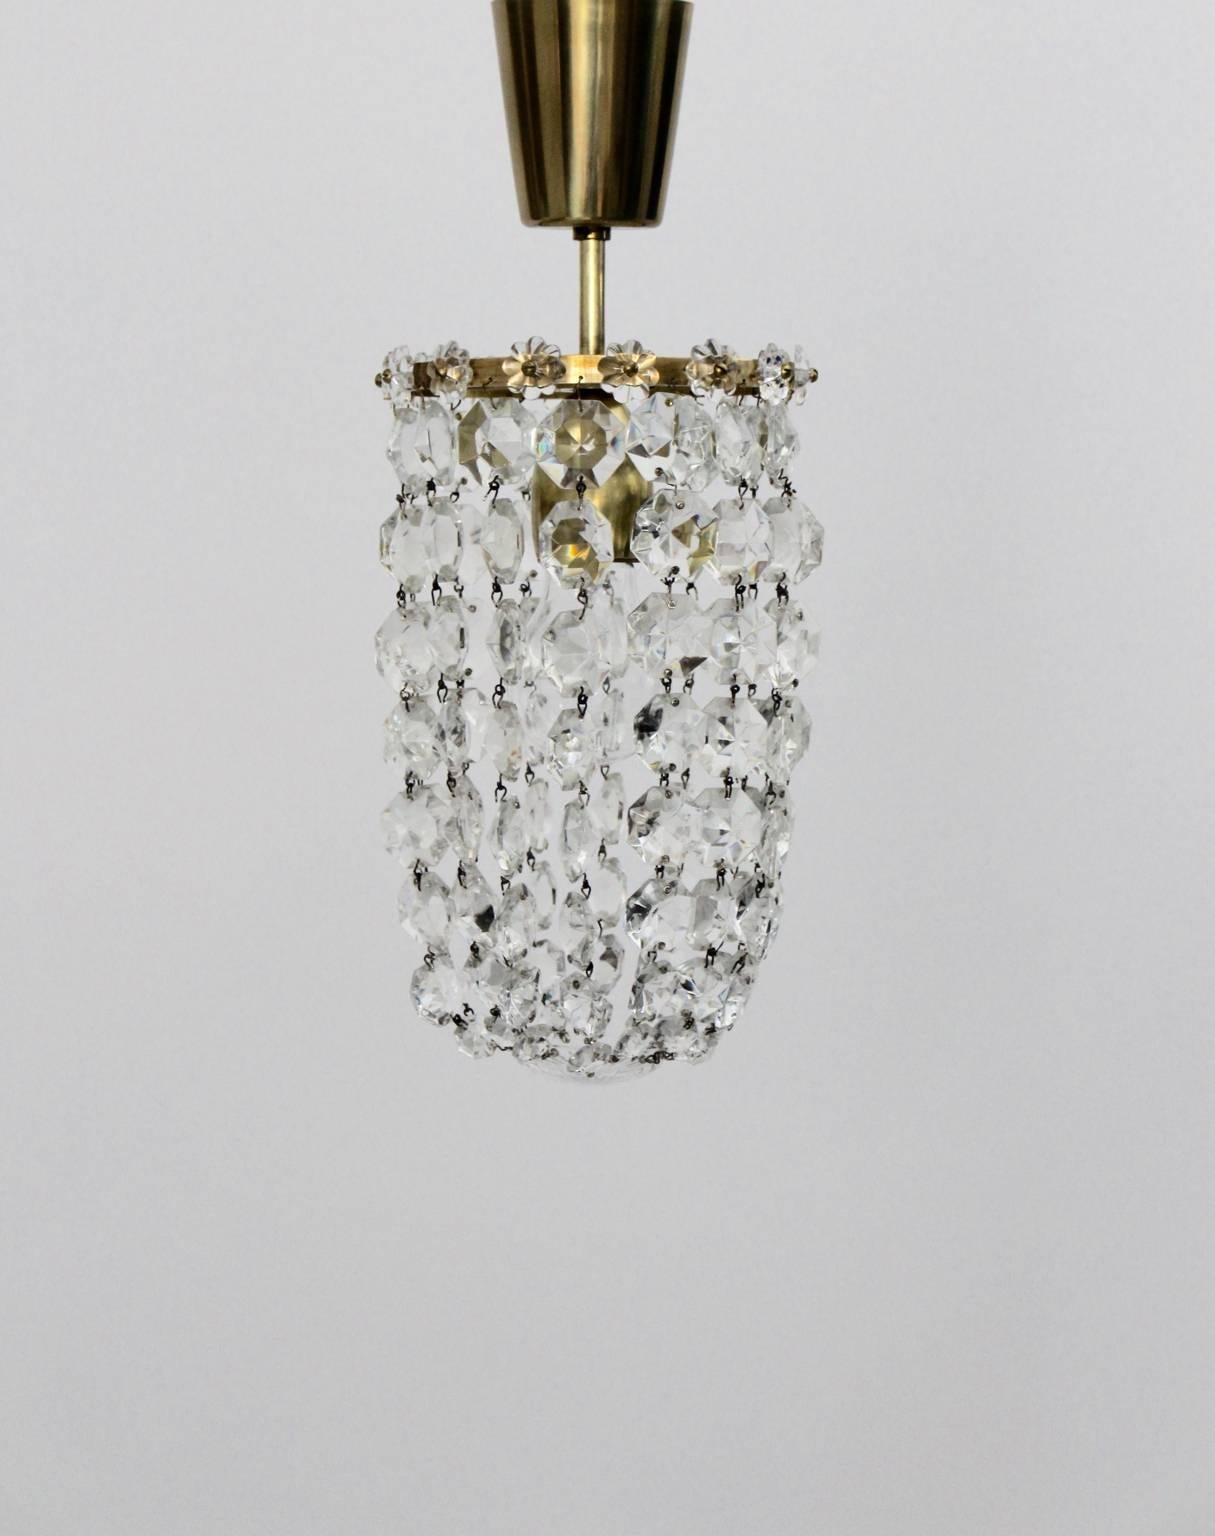 This lovely cut crystal glass chandelier was designed and manufactured
by Bakalowits & Soehne, Vienna 1950s.
The material of the frame is brass also the lampshade was decorated with 112 cut crystal glass and 14 glass flowers.
The chandelier features